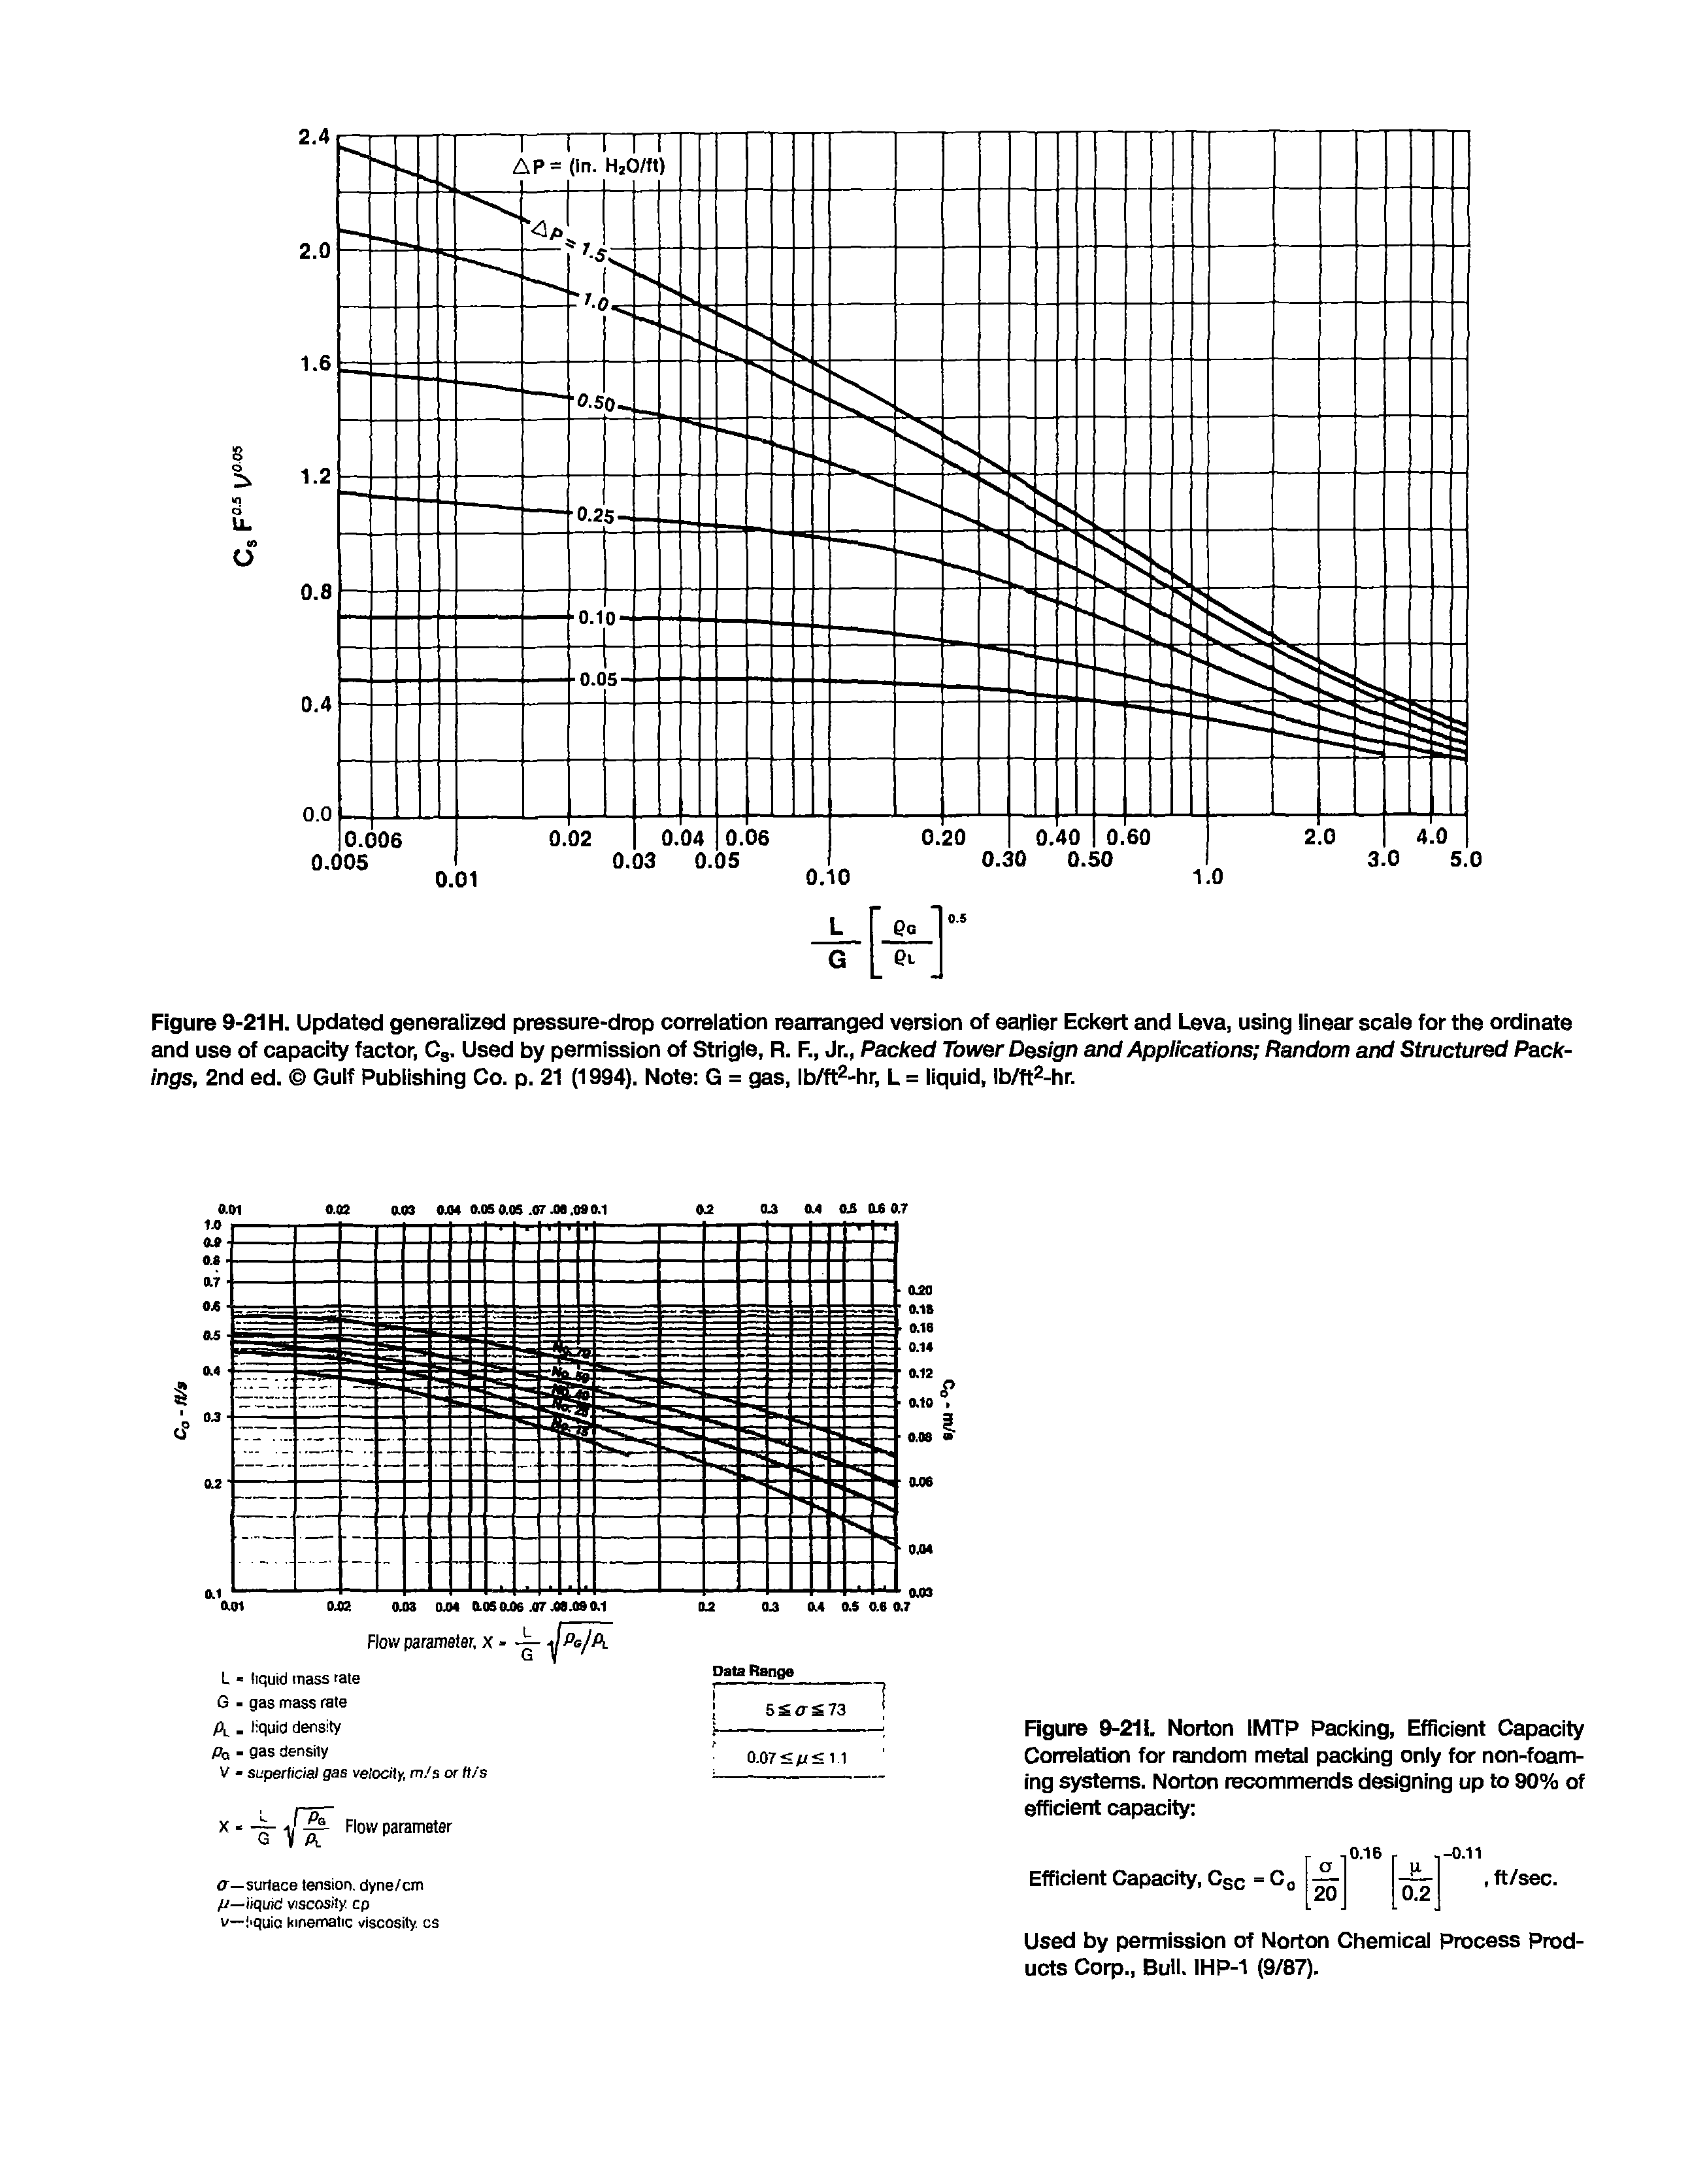 Figure 9-21H. Updated generalized pressure-drop correlation rearranged version of earlier Eckert and Leva, using linear scale for the ordinate and use of capacity factor, Cg. Used by permission of Strigle, R. F., Jr., Packed Tower Design and Applications Random and Structured Packings, 2nd ed. Gulf Publishing Co. p. 21 (1994). Note G = gas, Ib/ft -hr, L = liquid, Ib/ft -hr.